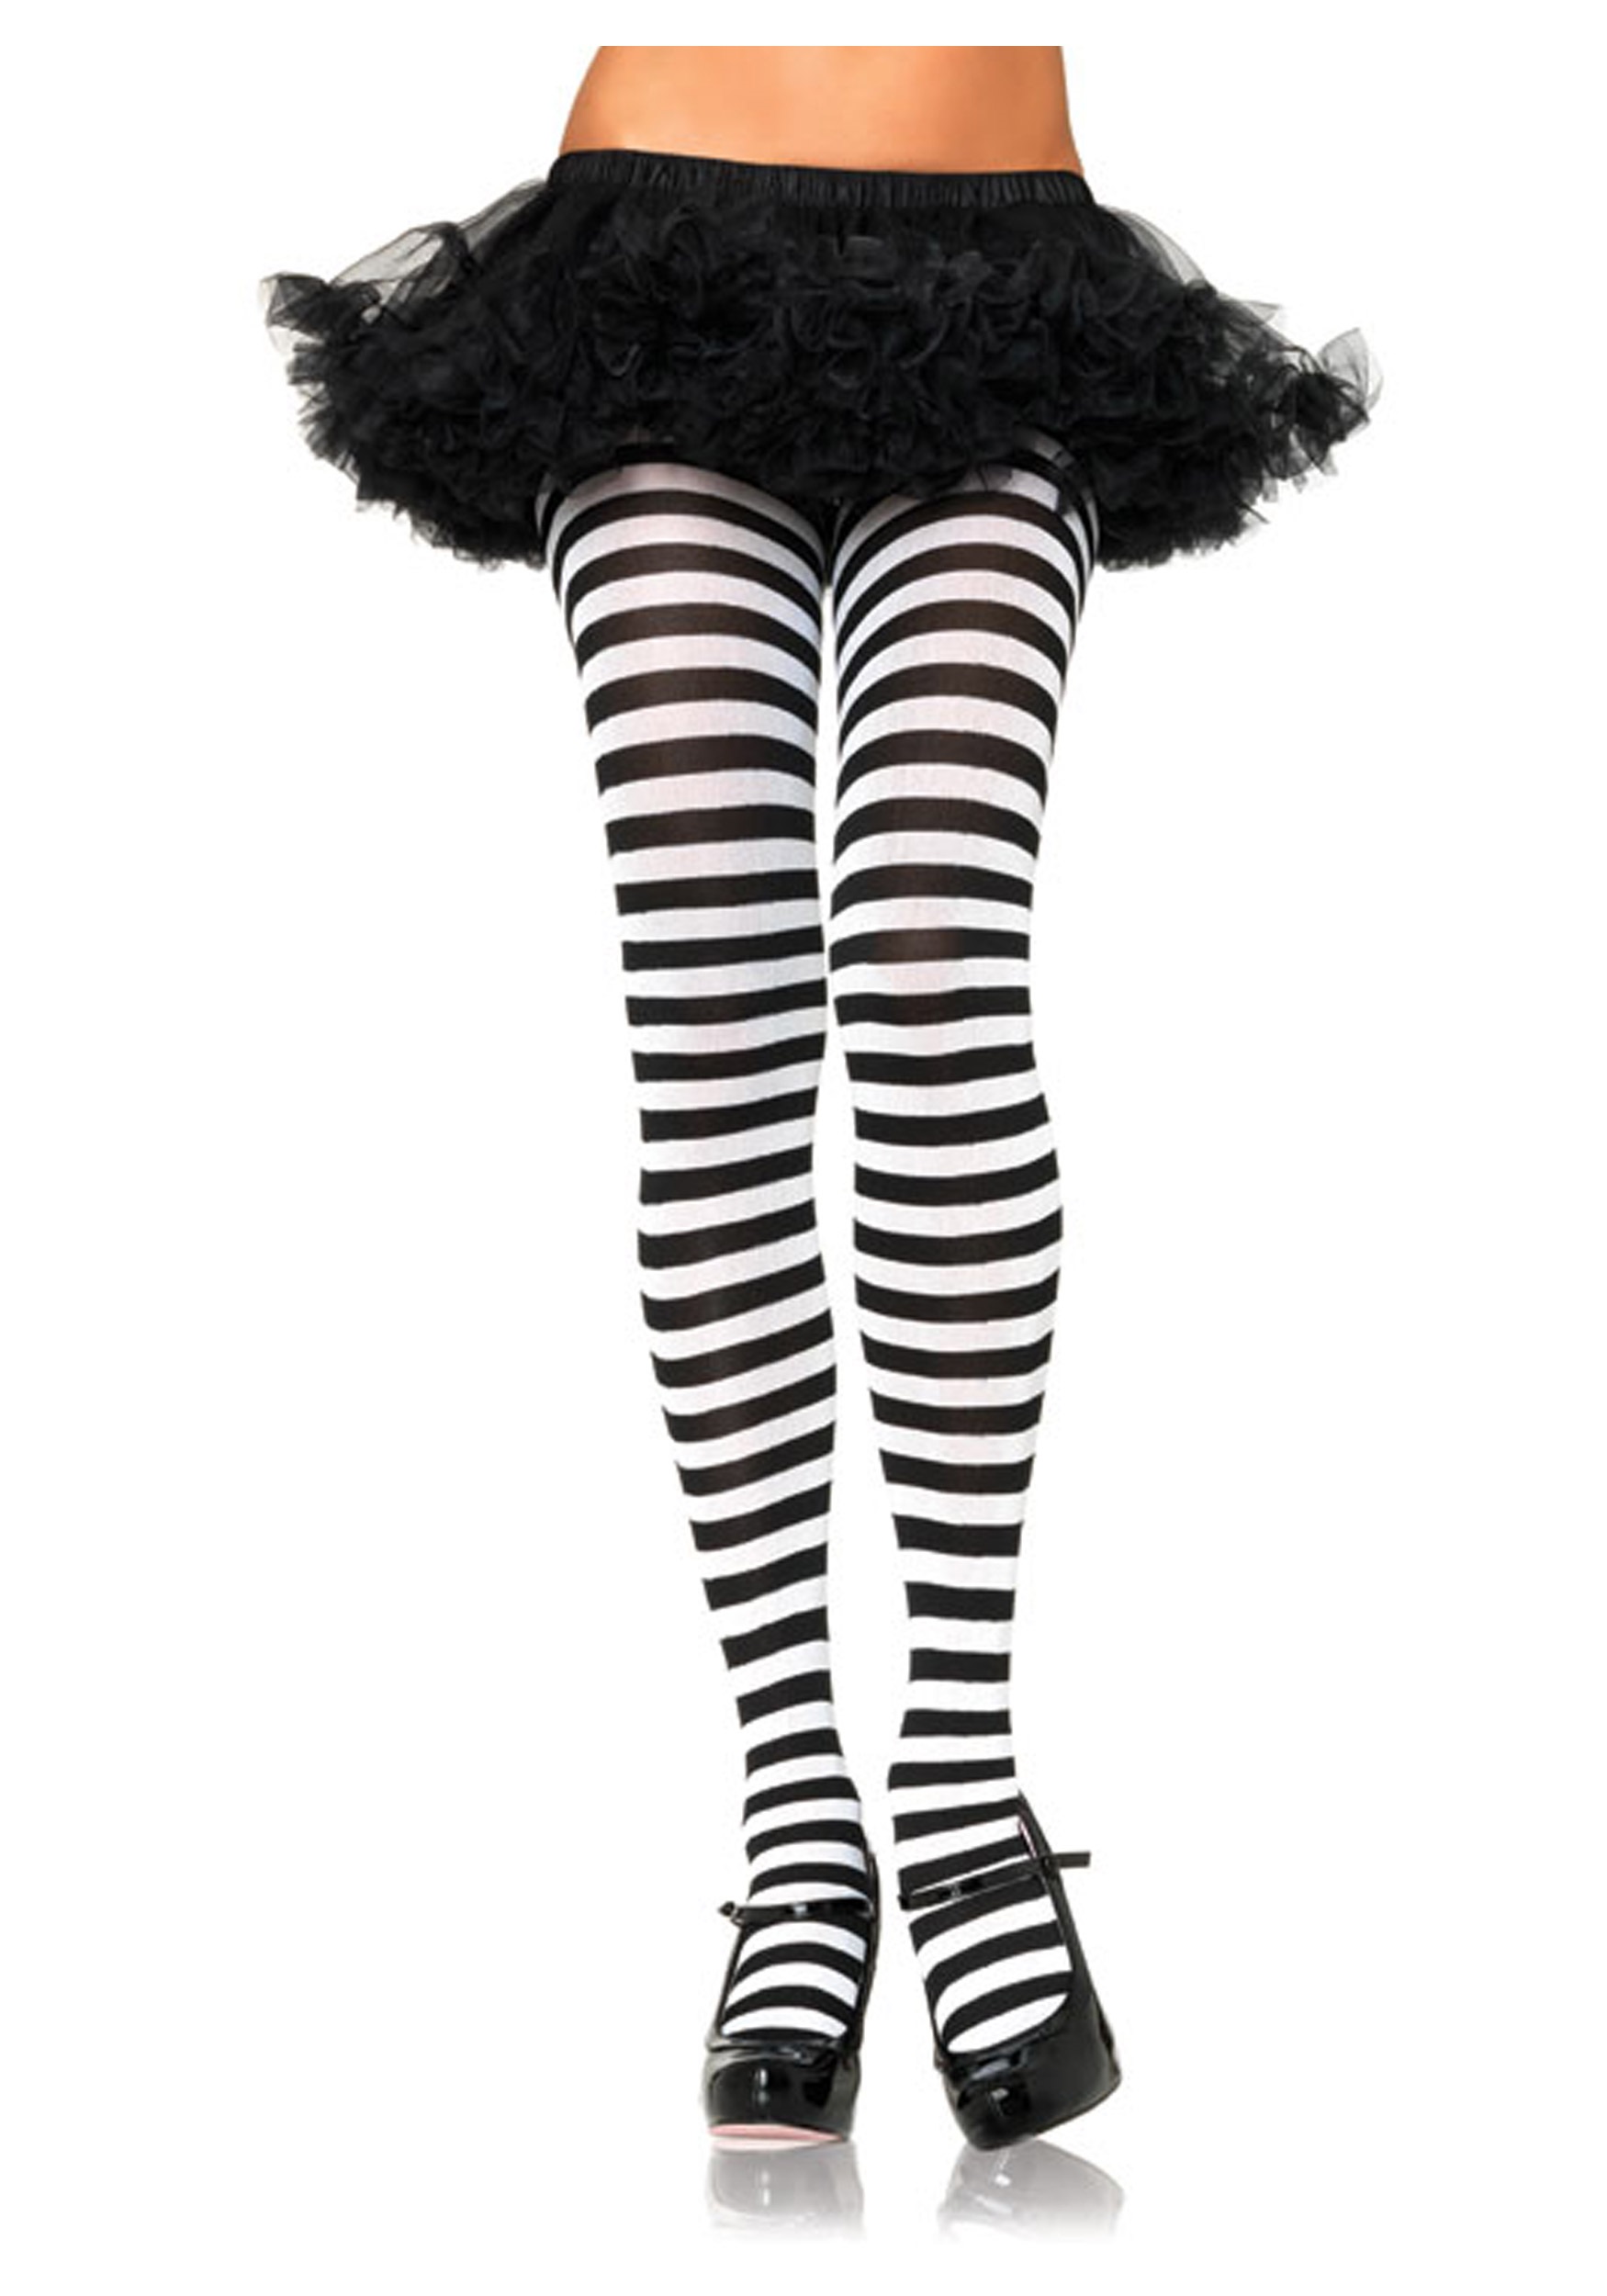 16 Black and White Striped Tights ideas